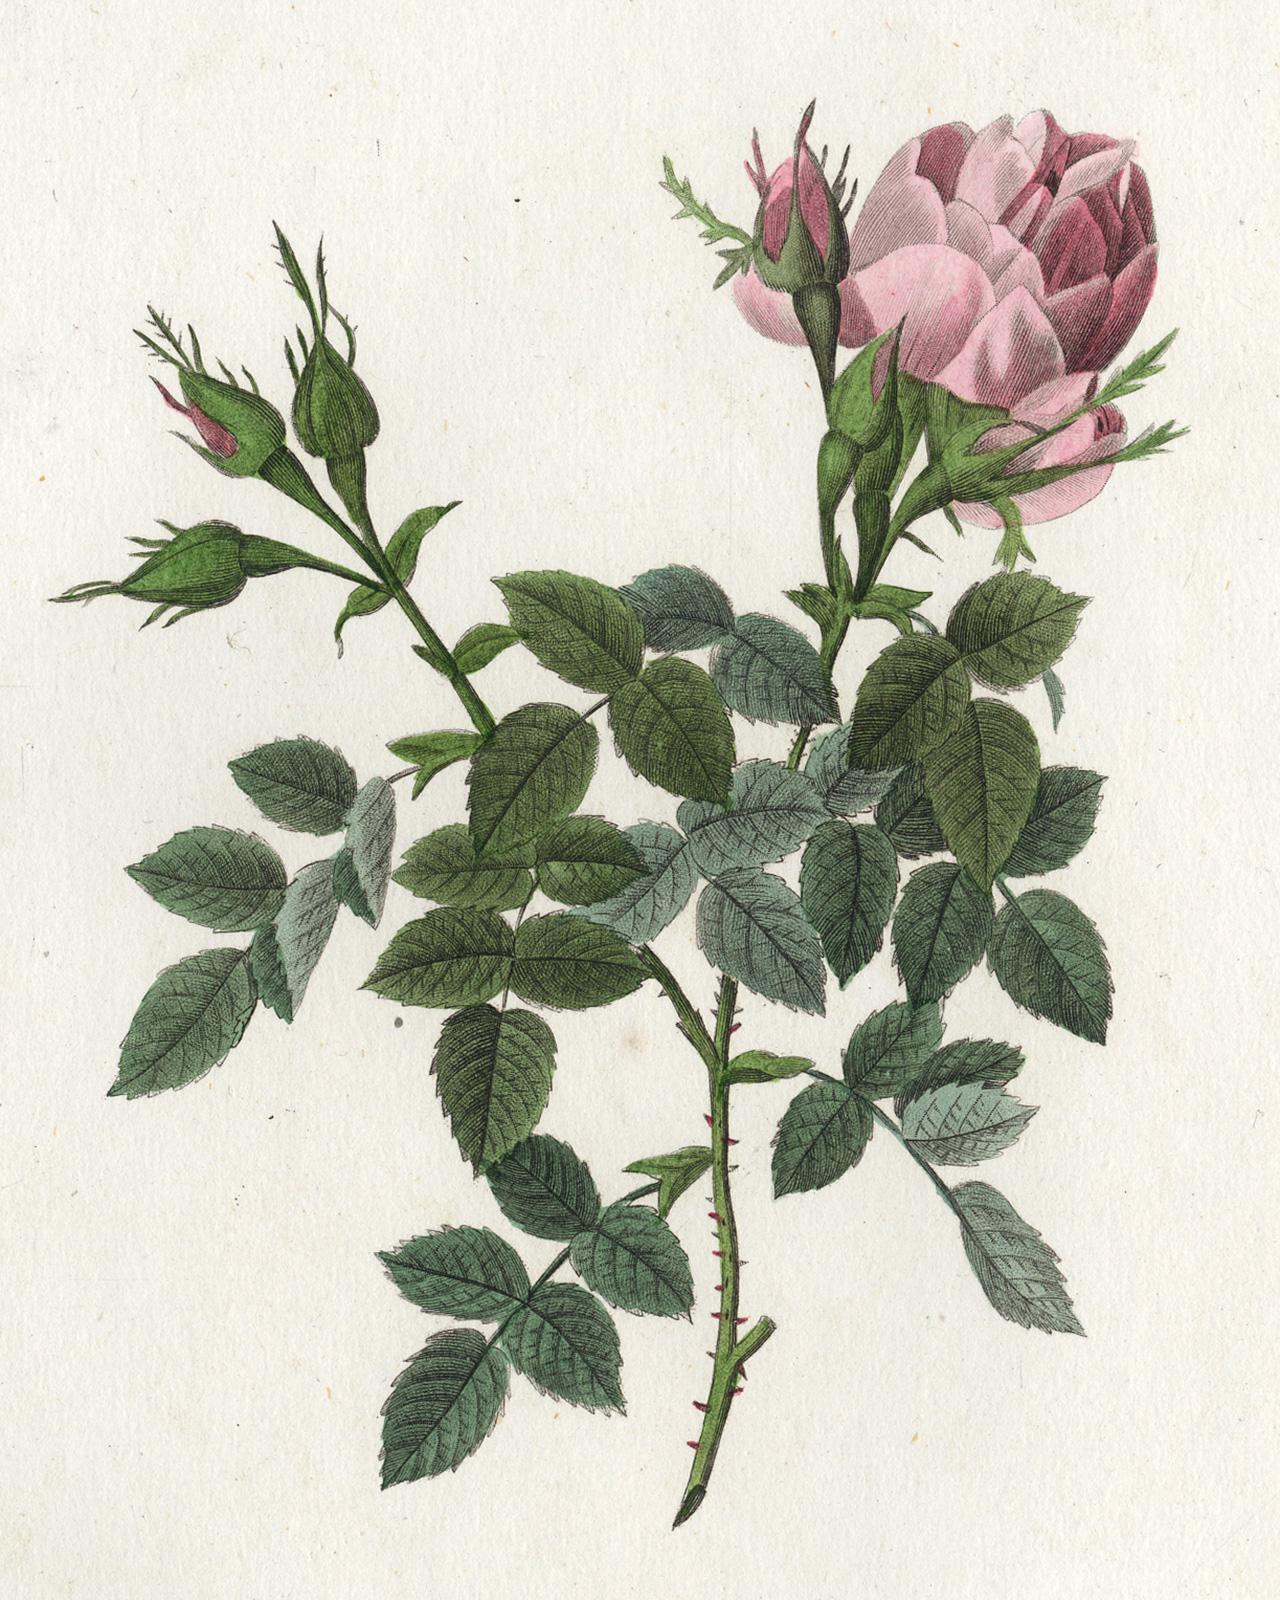 Small Autumn Damask Rose by Redoute - Handcoloured engraving - 19th century - Print by Pierre-Joseph Redouté